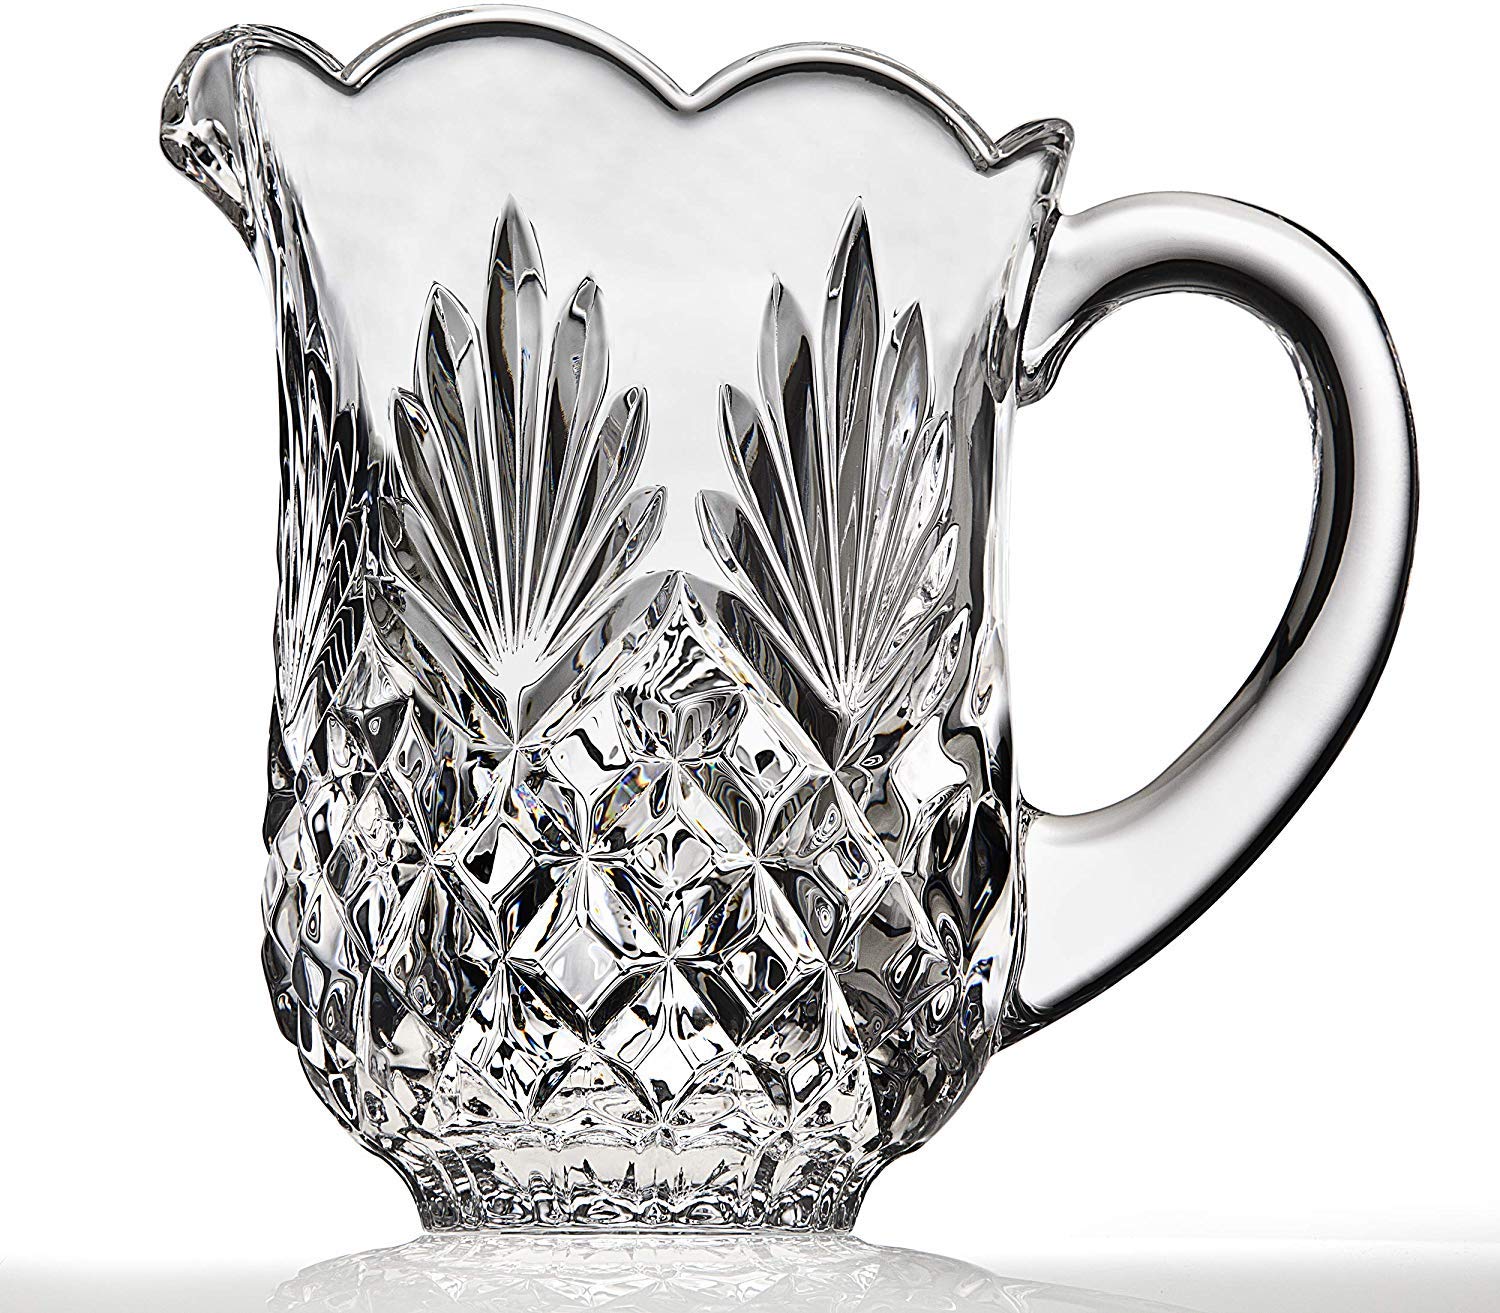 Elegant Crystal Pitcher Drinkware Set with 4 Crystal highball Tumblers, Beautiful Jug with handle and Spout for Chilled Beverage Homemade Juice, Iced Tea or Water